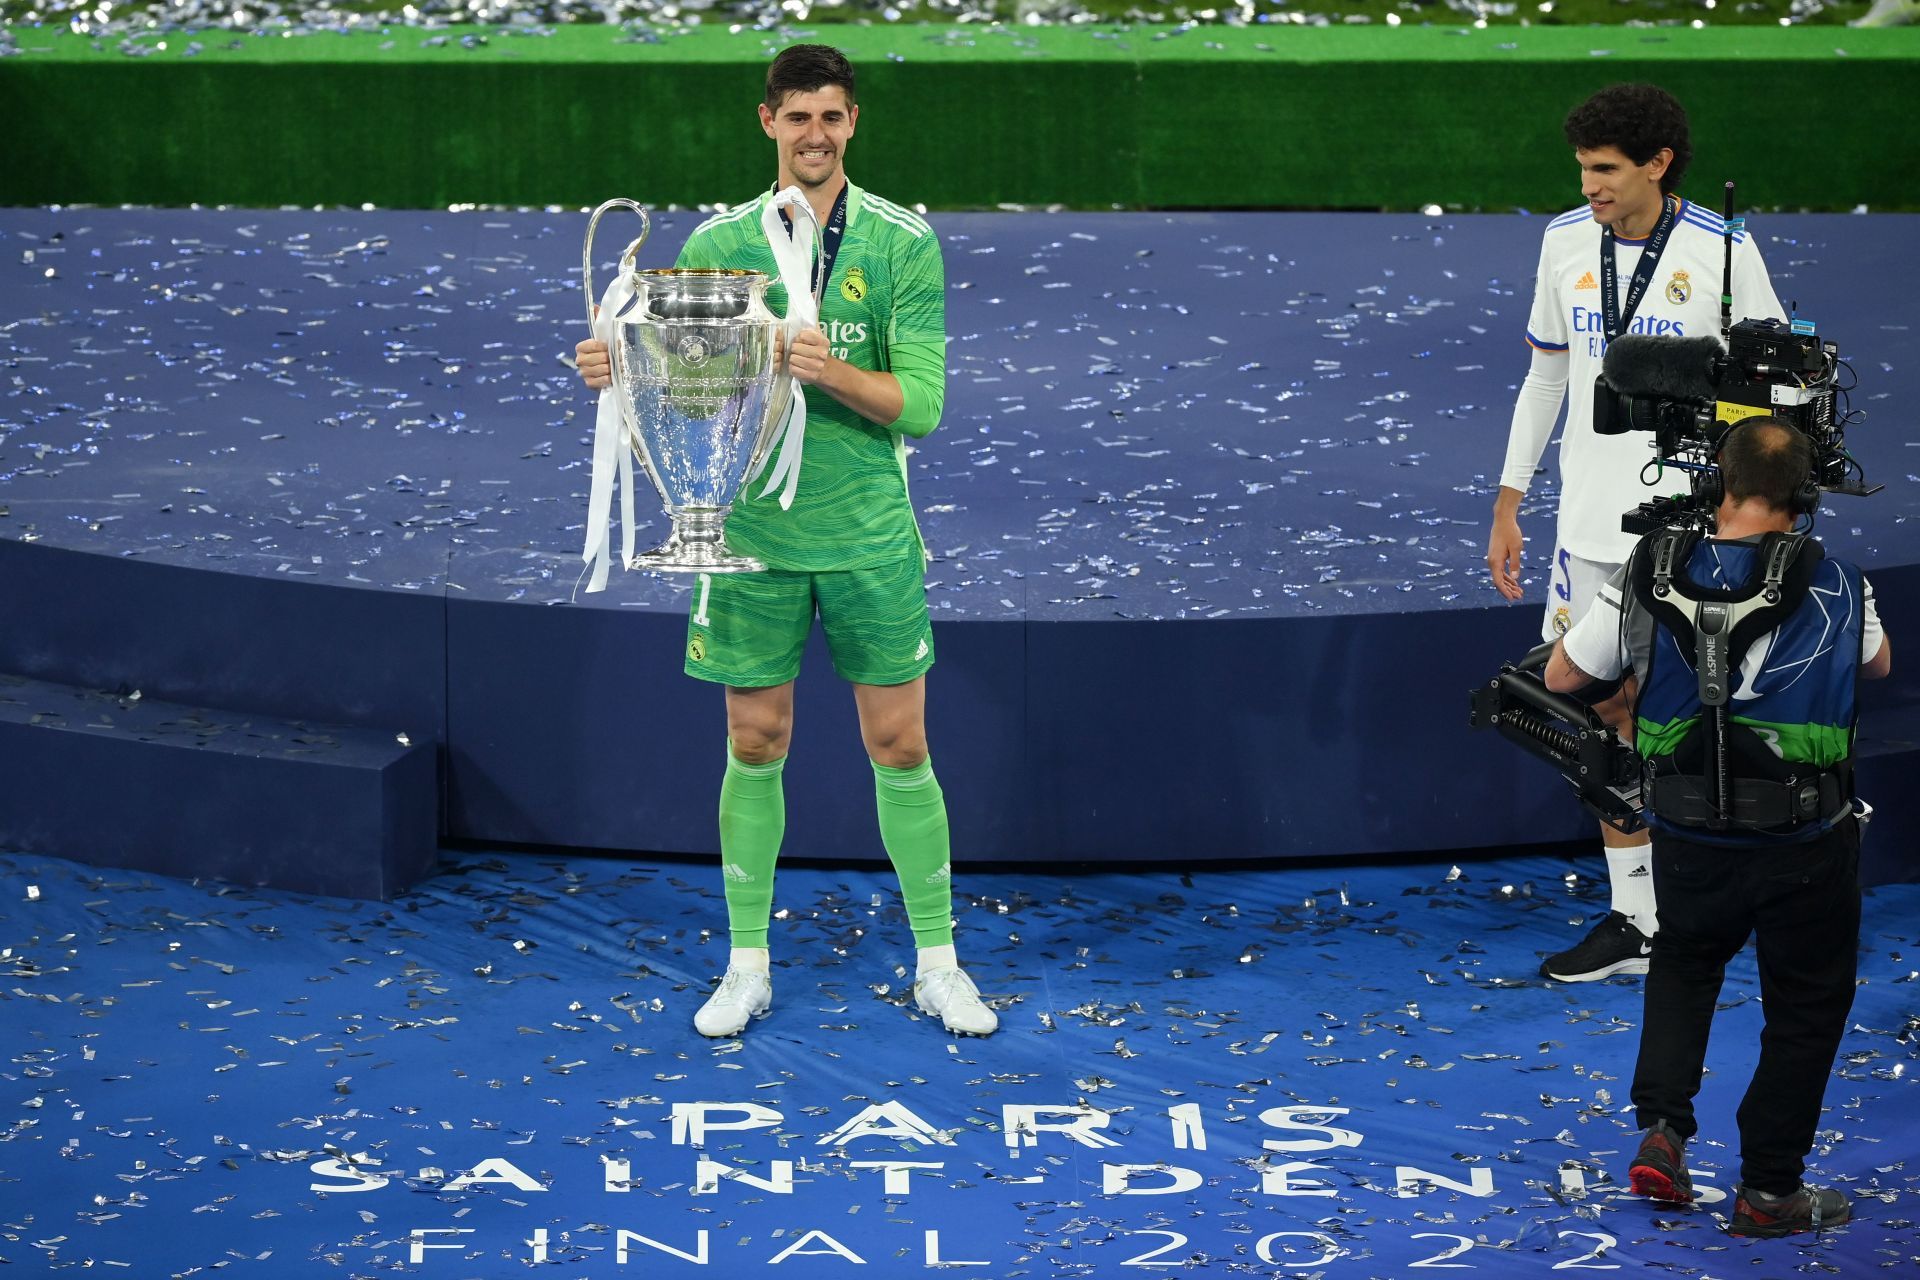 Thibaut Courtois is among the best goalkeepers in the world